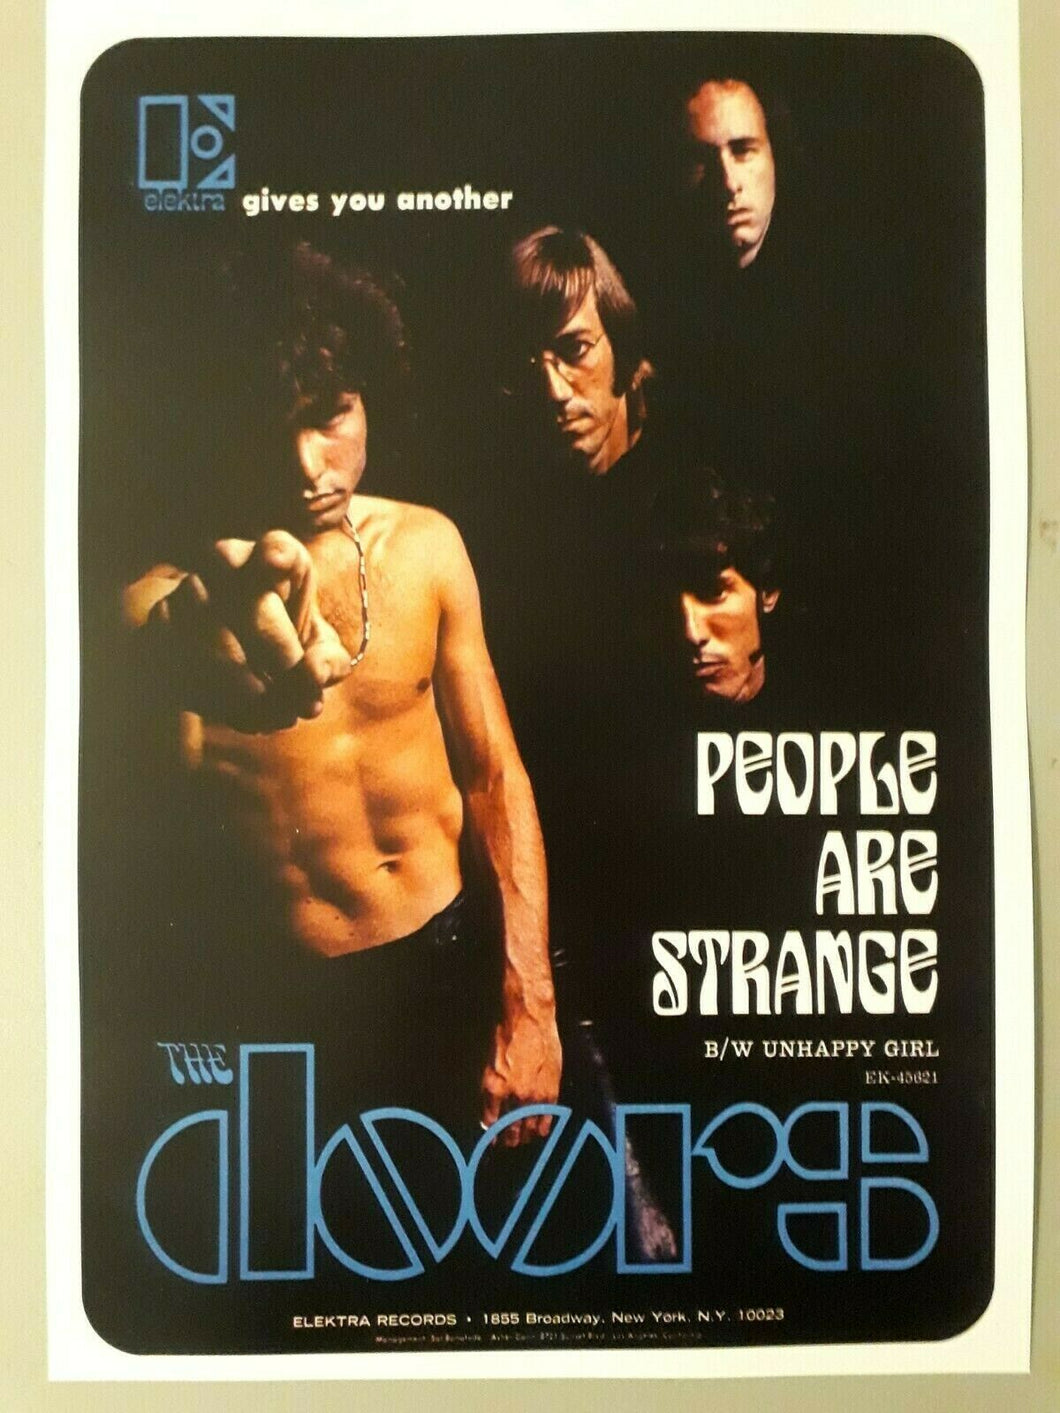 The Doors poster - People are Strange Elektra records 1969 new reprinted edition - Original Music and Movie Posters for sale from Bamalama - Online Poster Store UK London